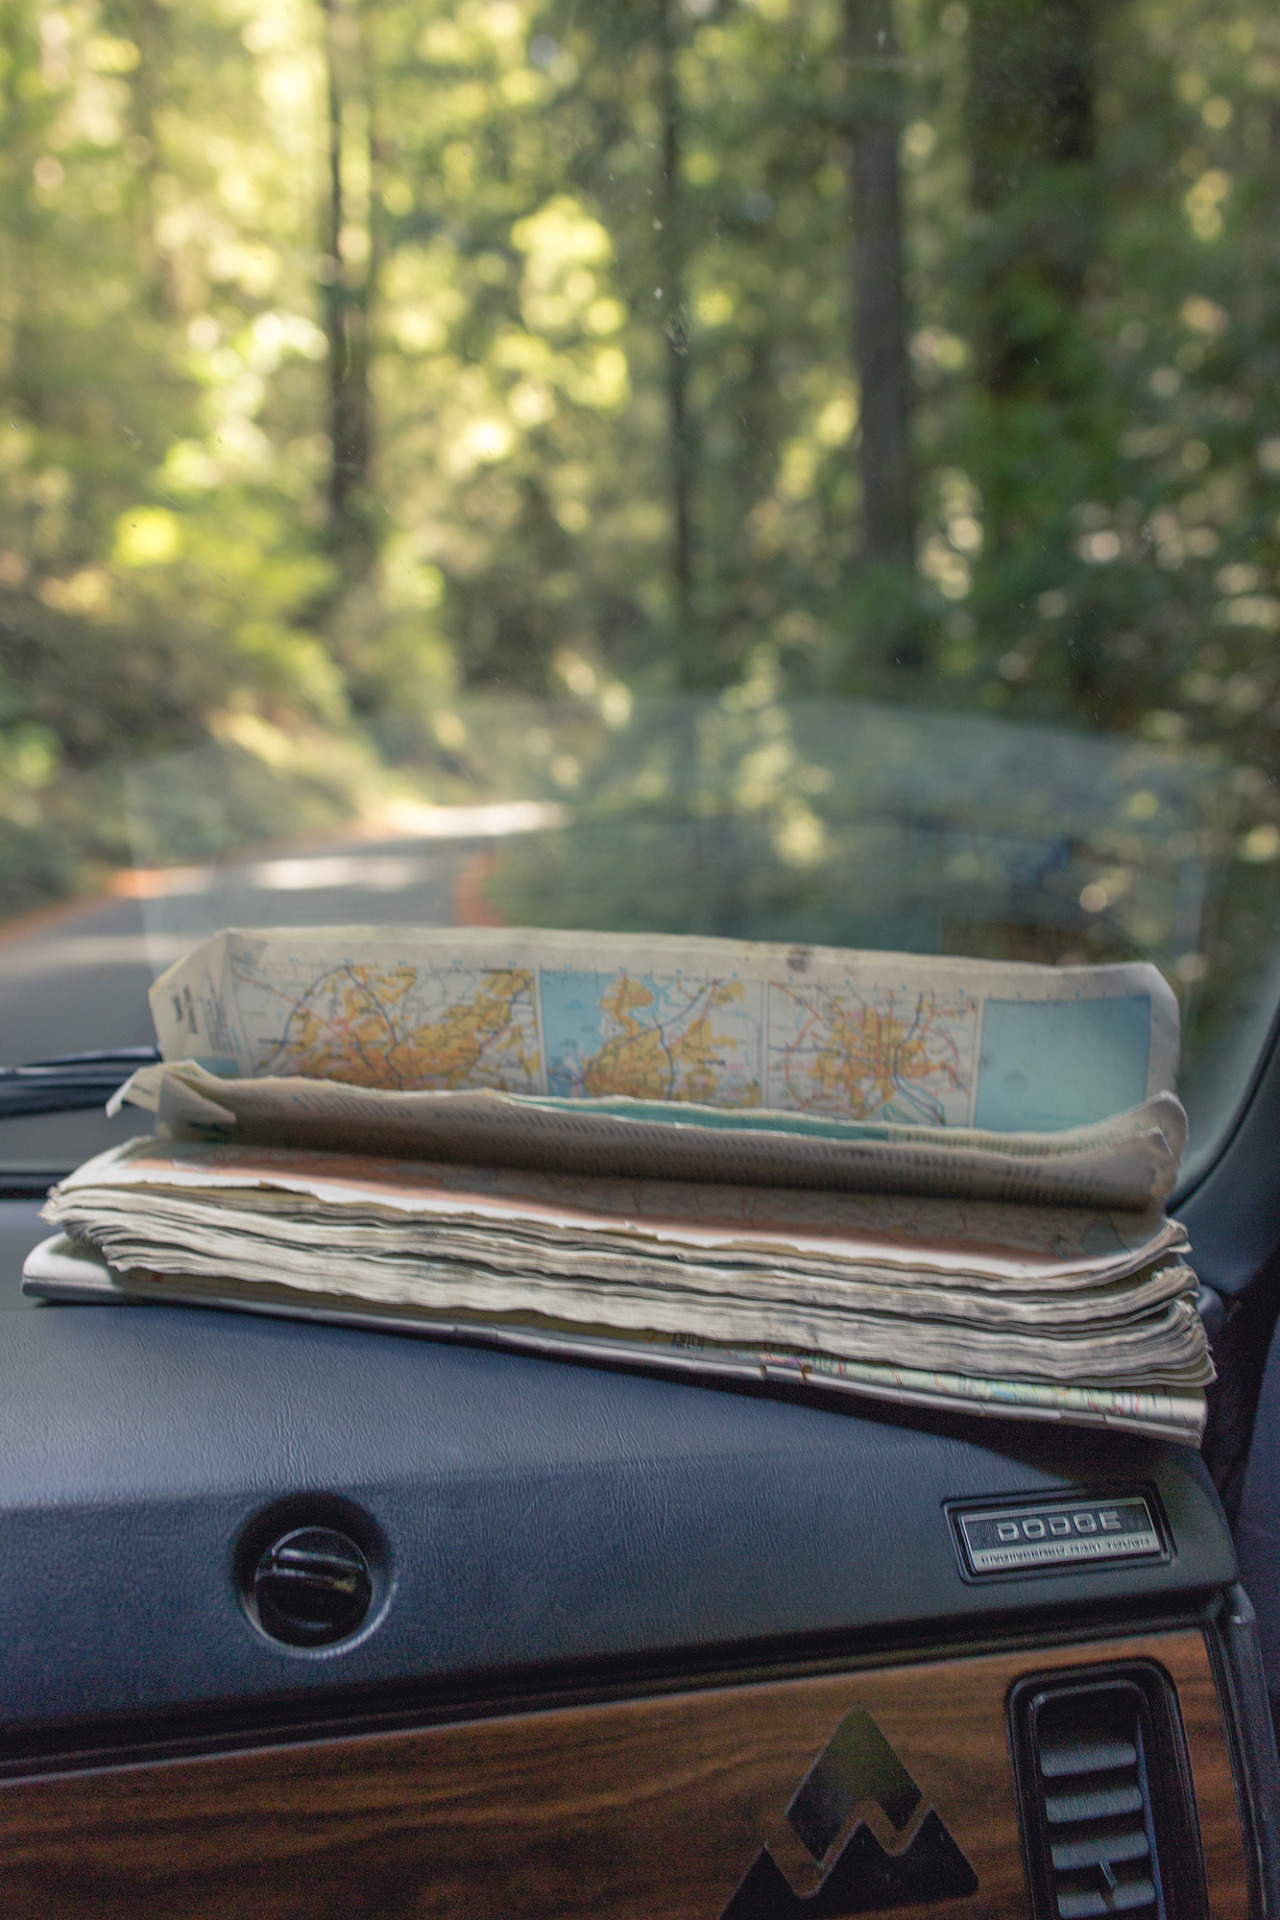 Our road trip {in the planning}